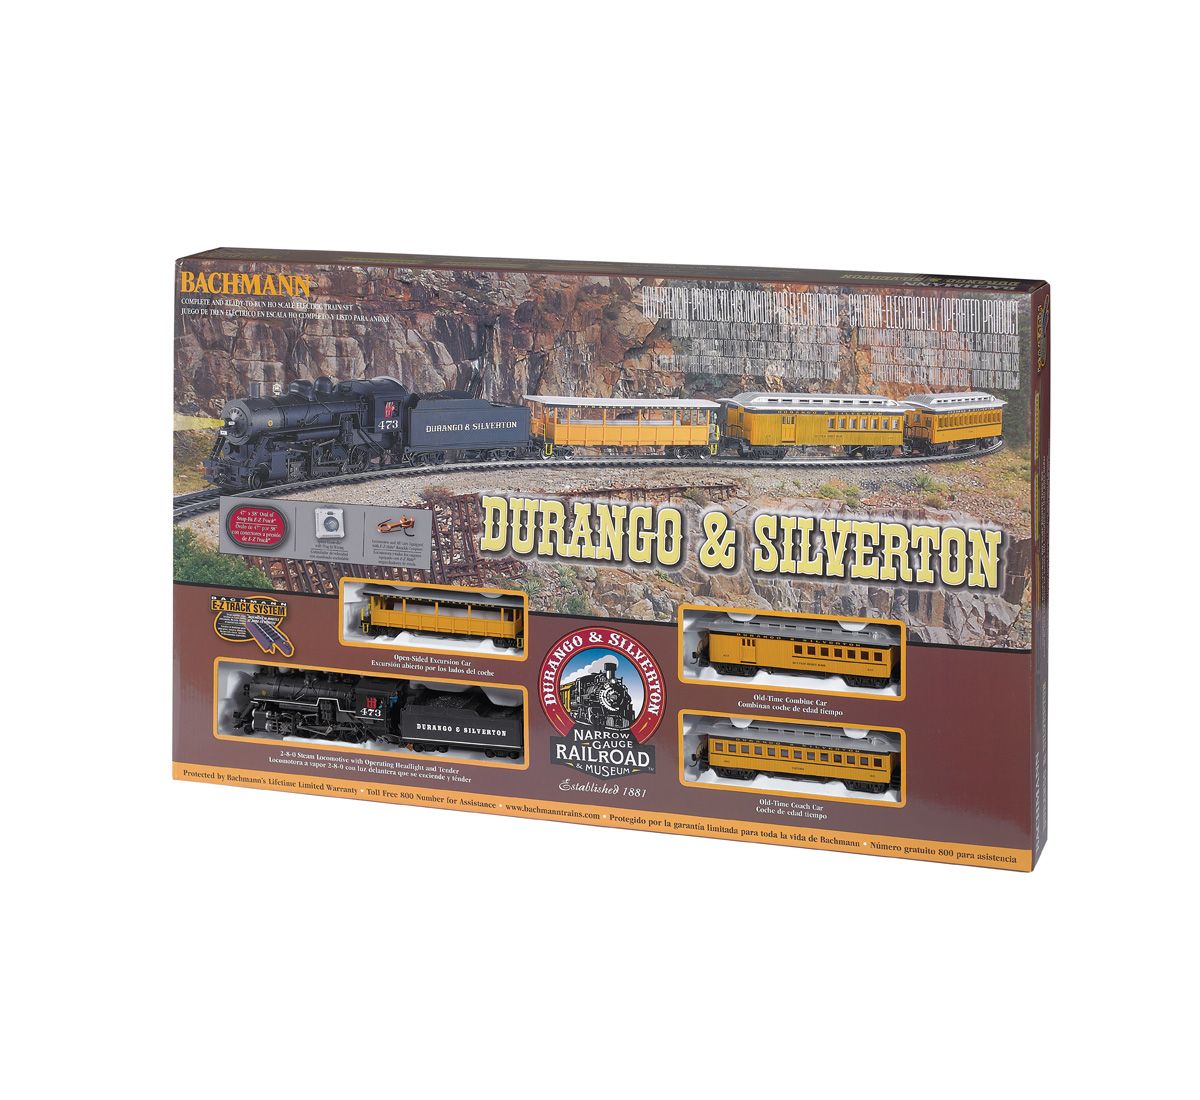 BACHMANN HO TRAIN SET COMPLETE NOS HAVE TWO INSTOCK